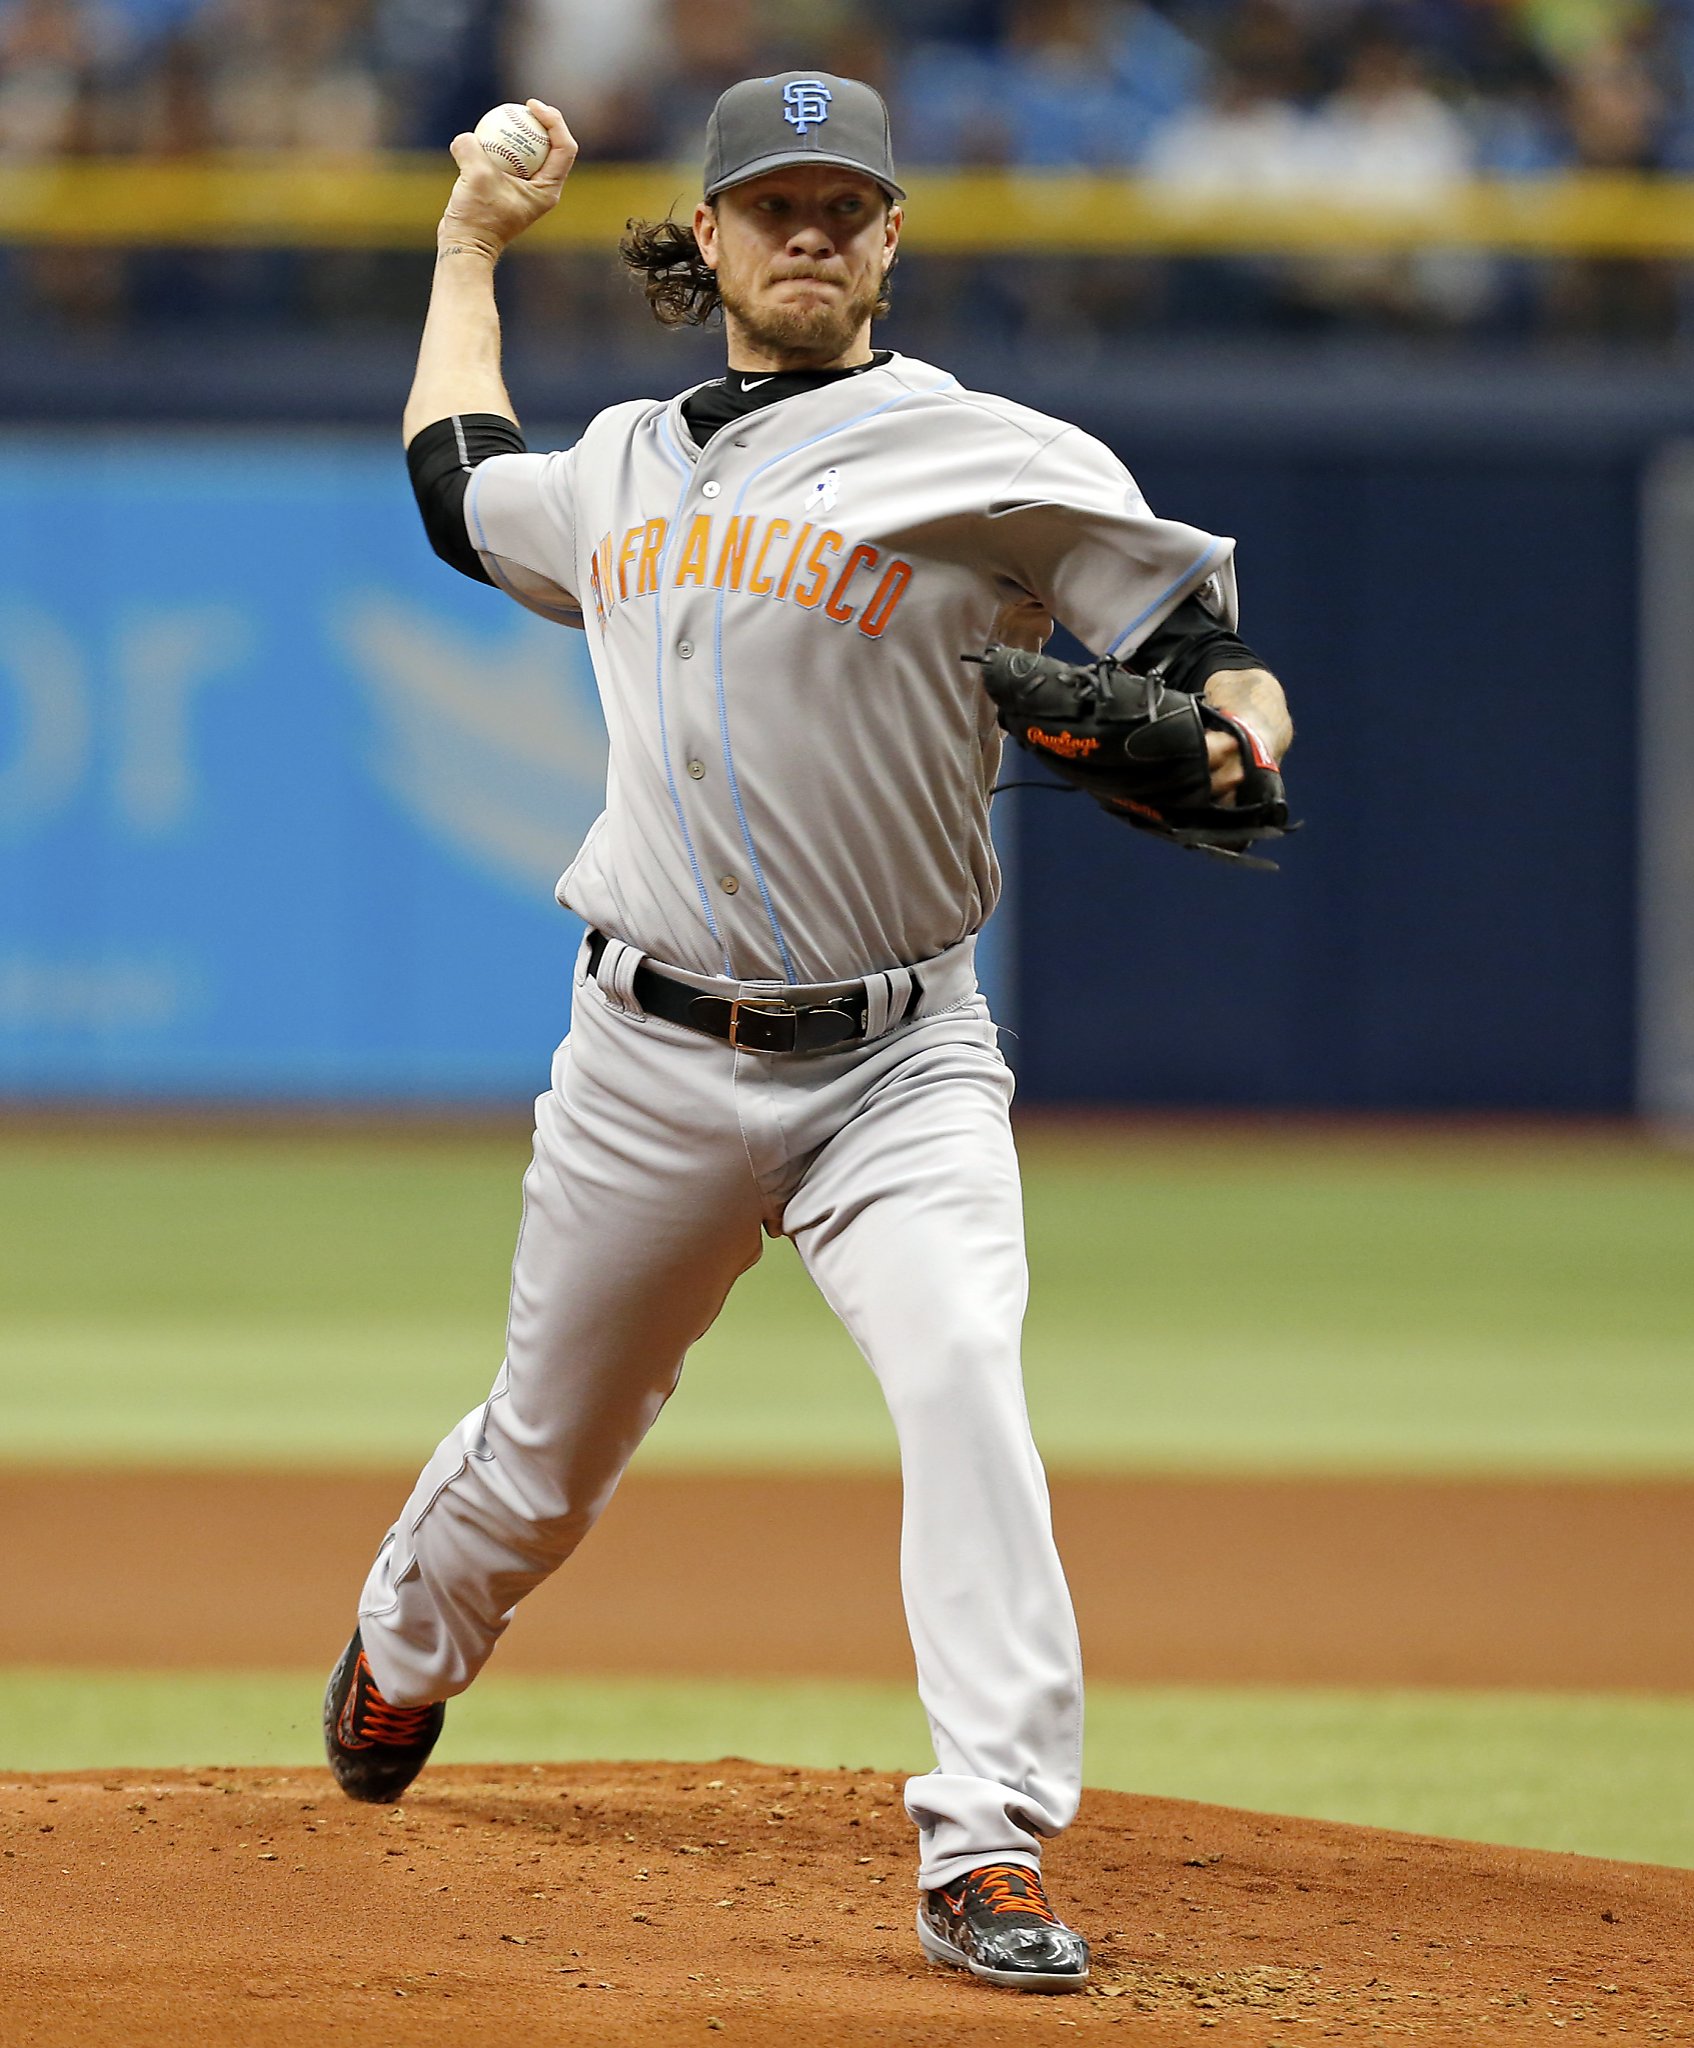 Giants' Jake Peavy defrauded of millions in investment scheme, feds allege